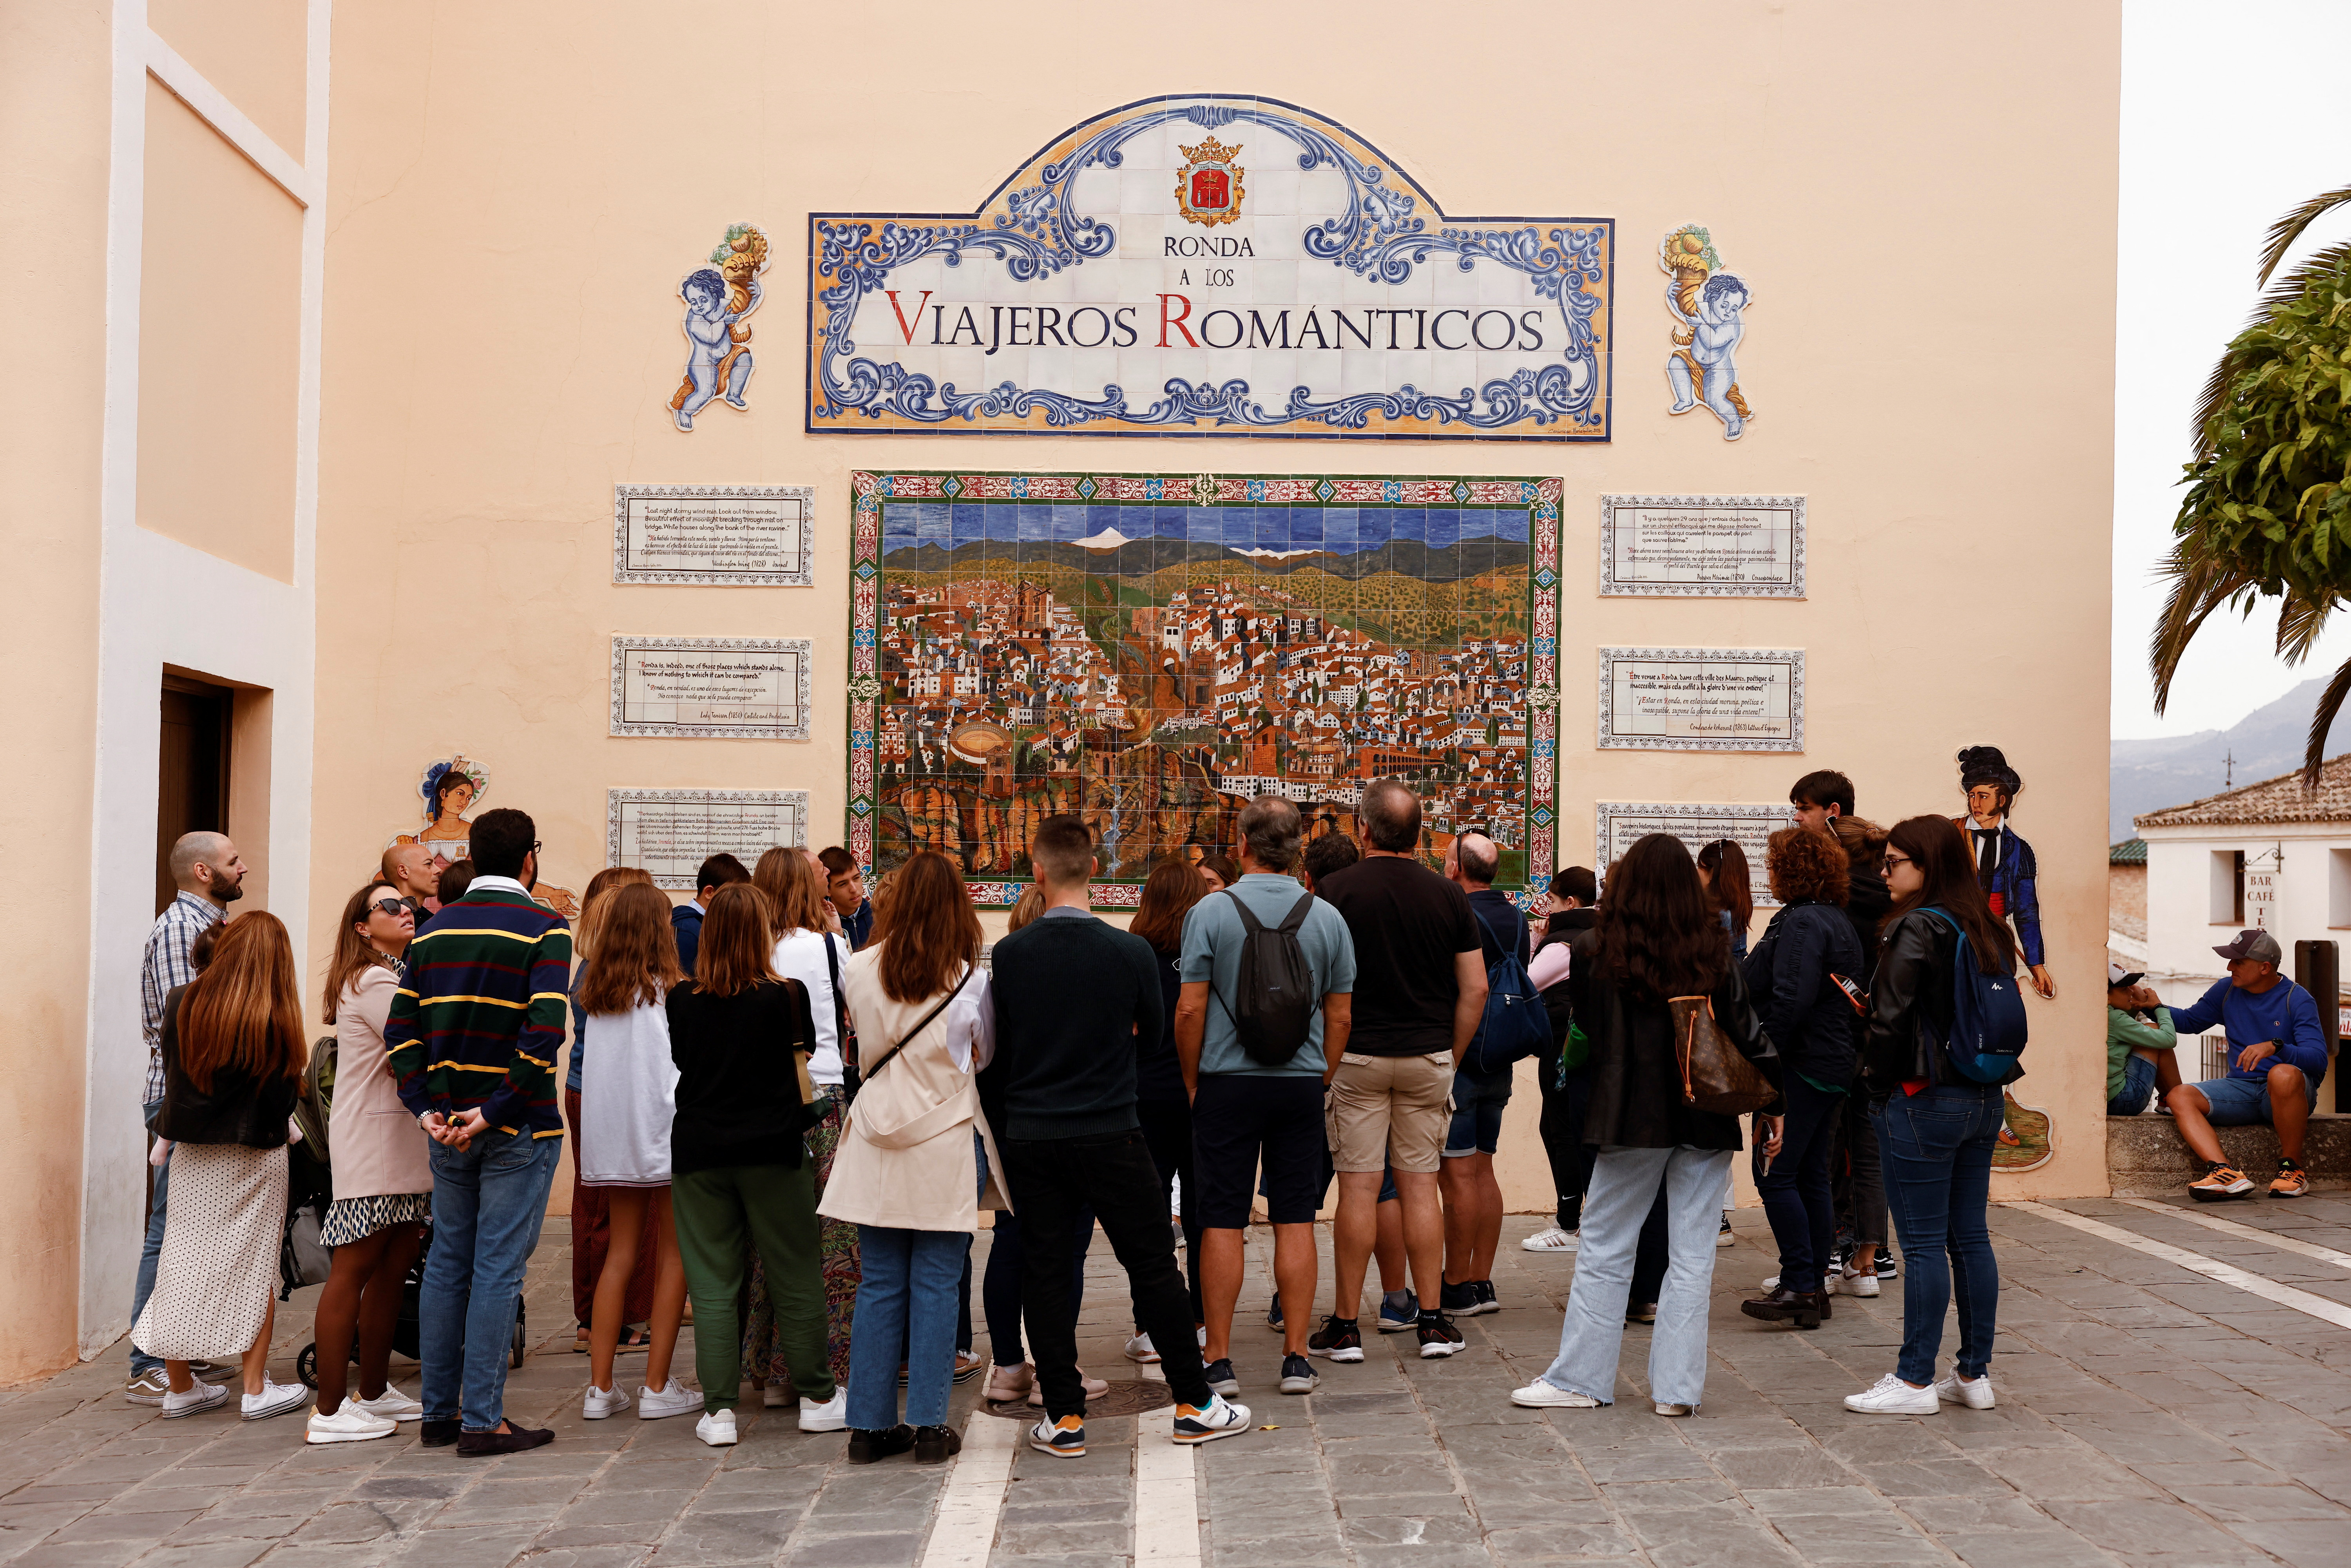 Tourists listen to a guide during a tour in Ronda